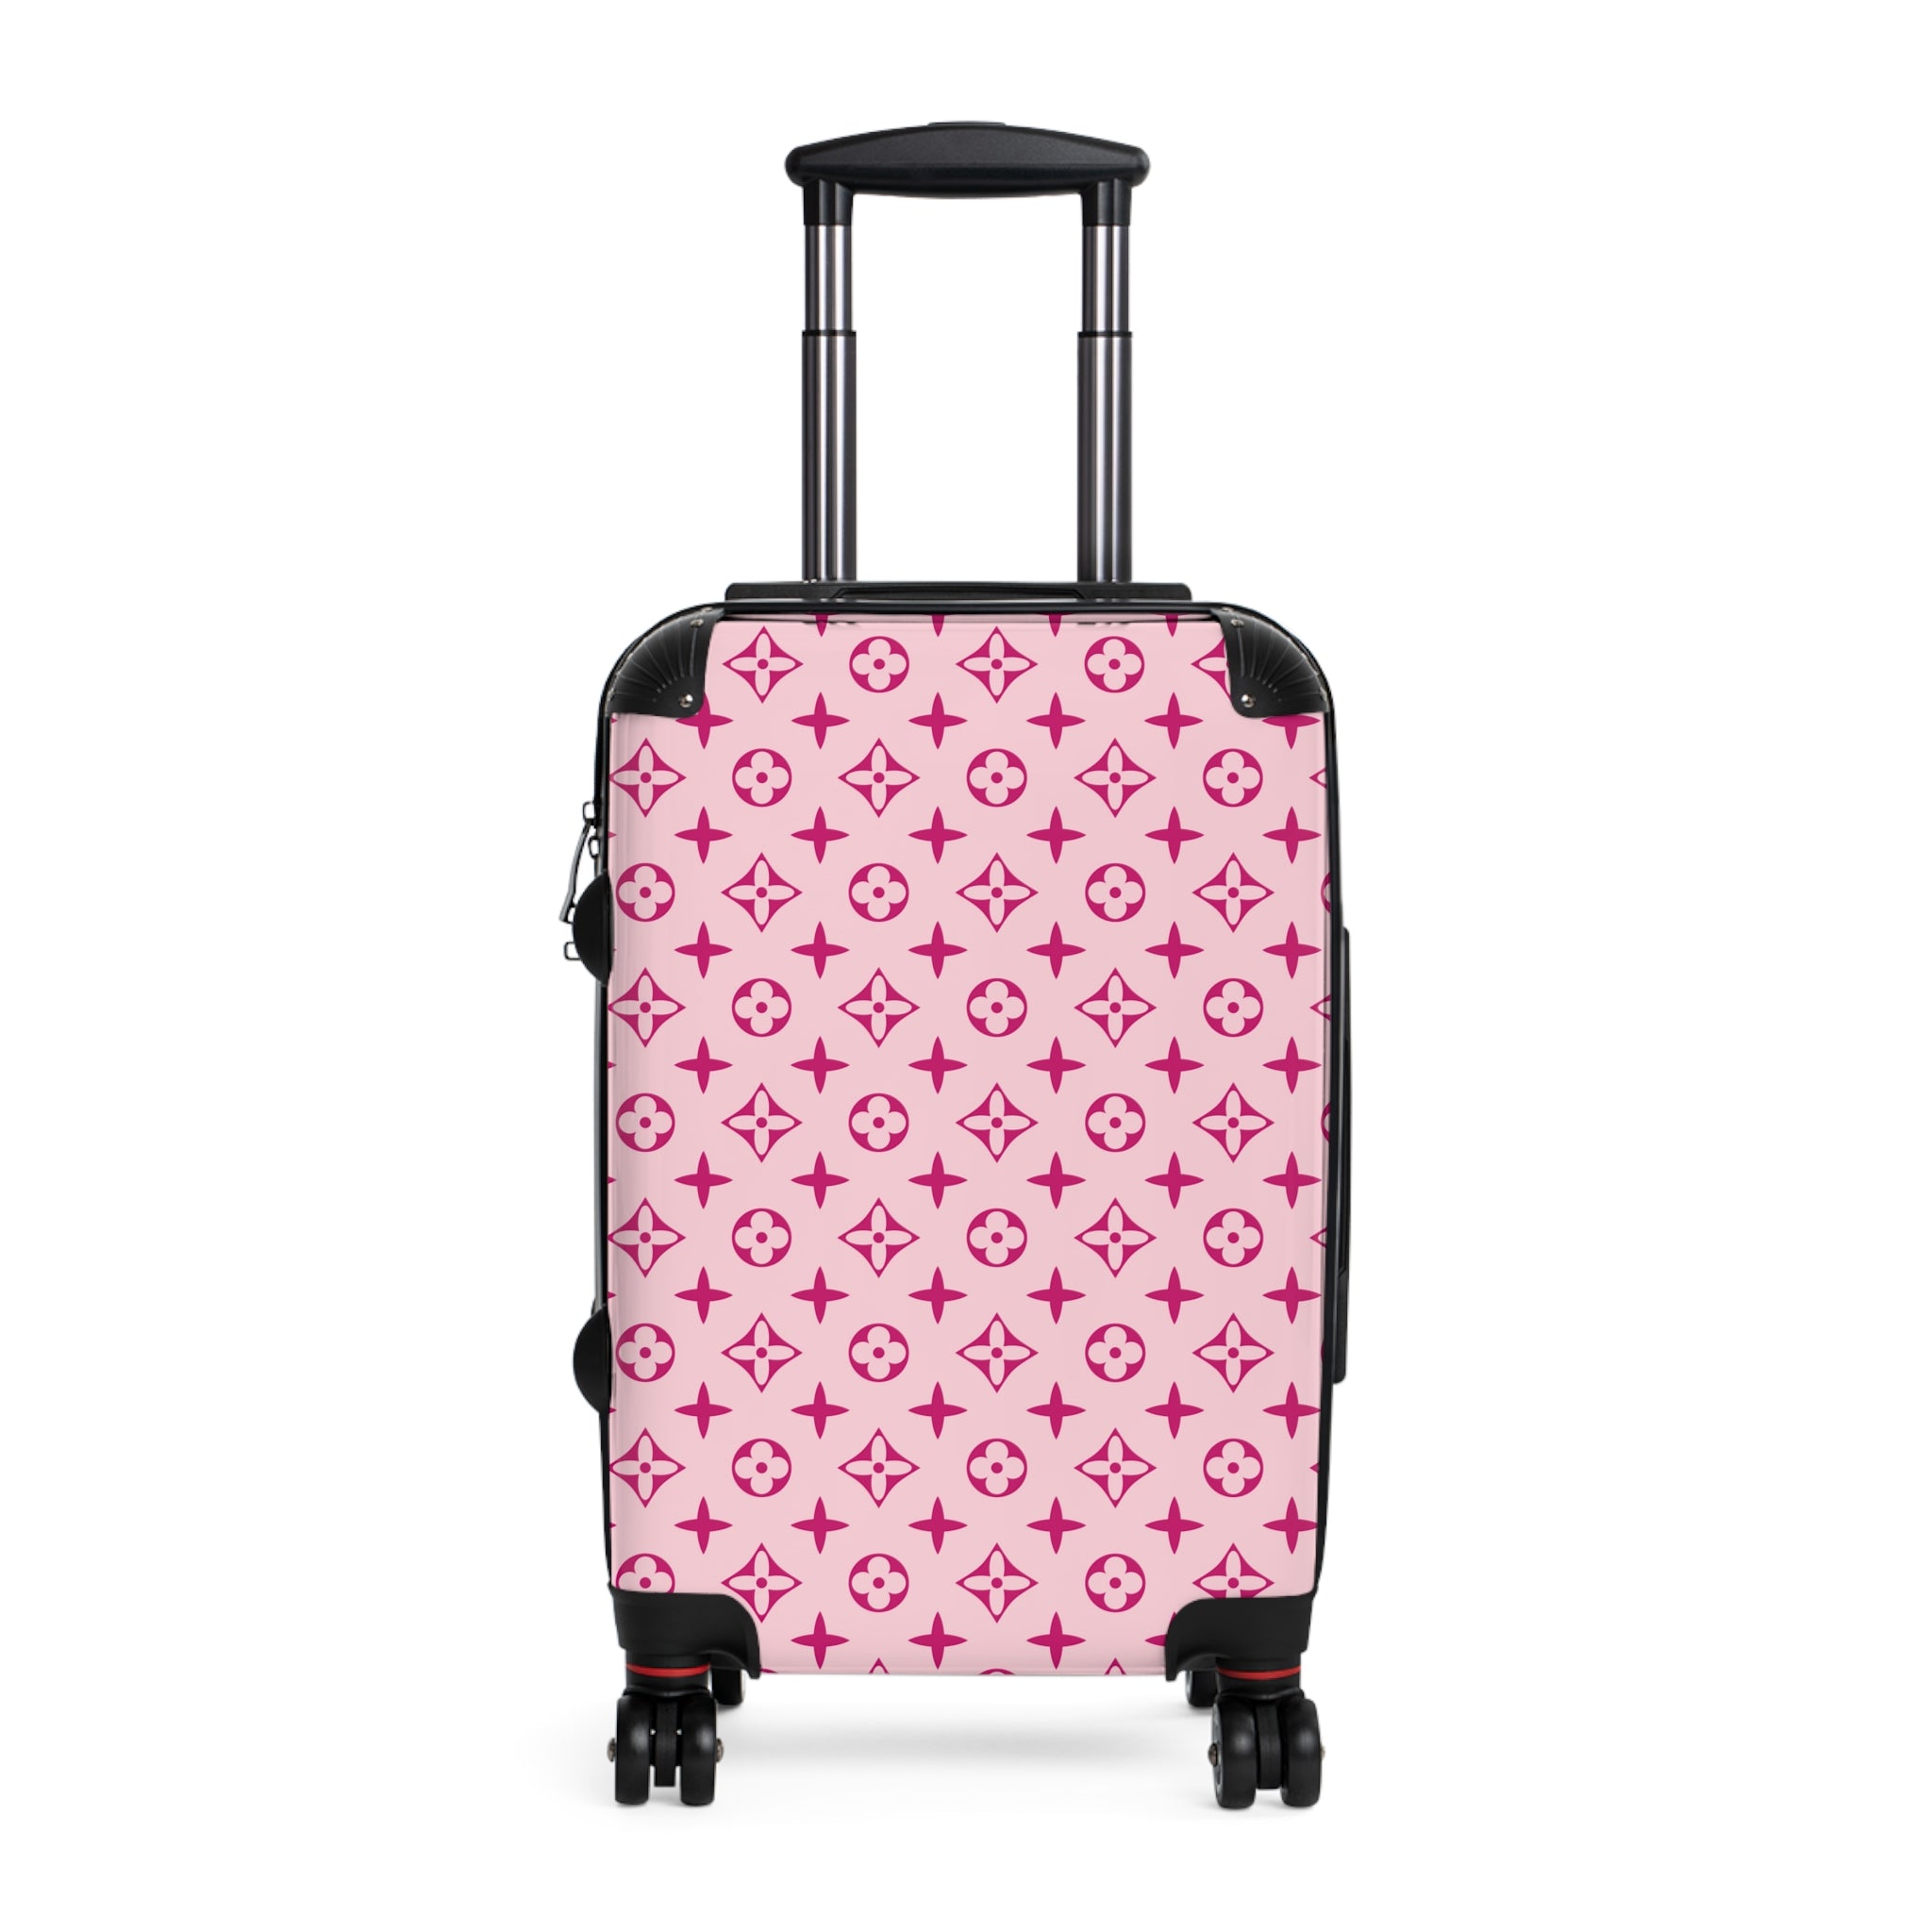 Abby Travel Collection Large Pink Icon Suitcase, Hard Shell Luggage, Rolling Suitcase for Travel, Carry On Bag Bags Small-Black The Middle Aged Groove